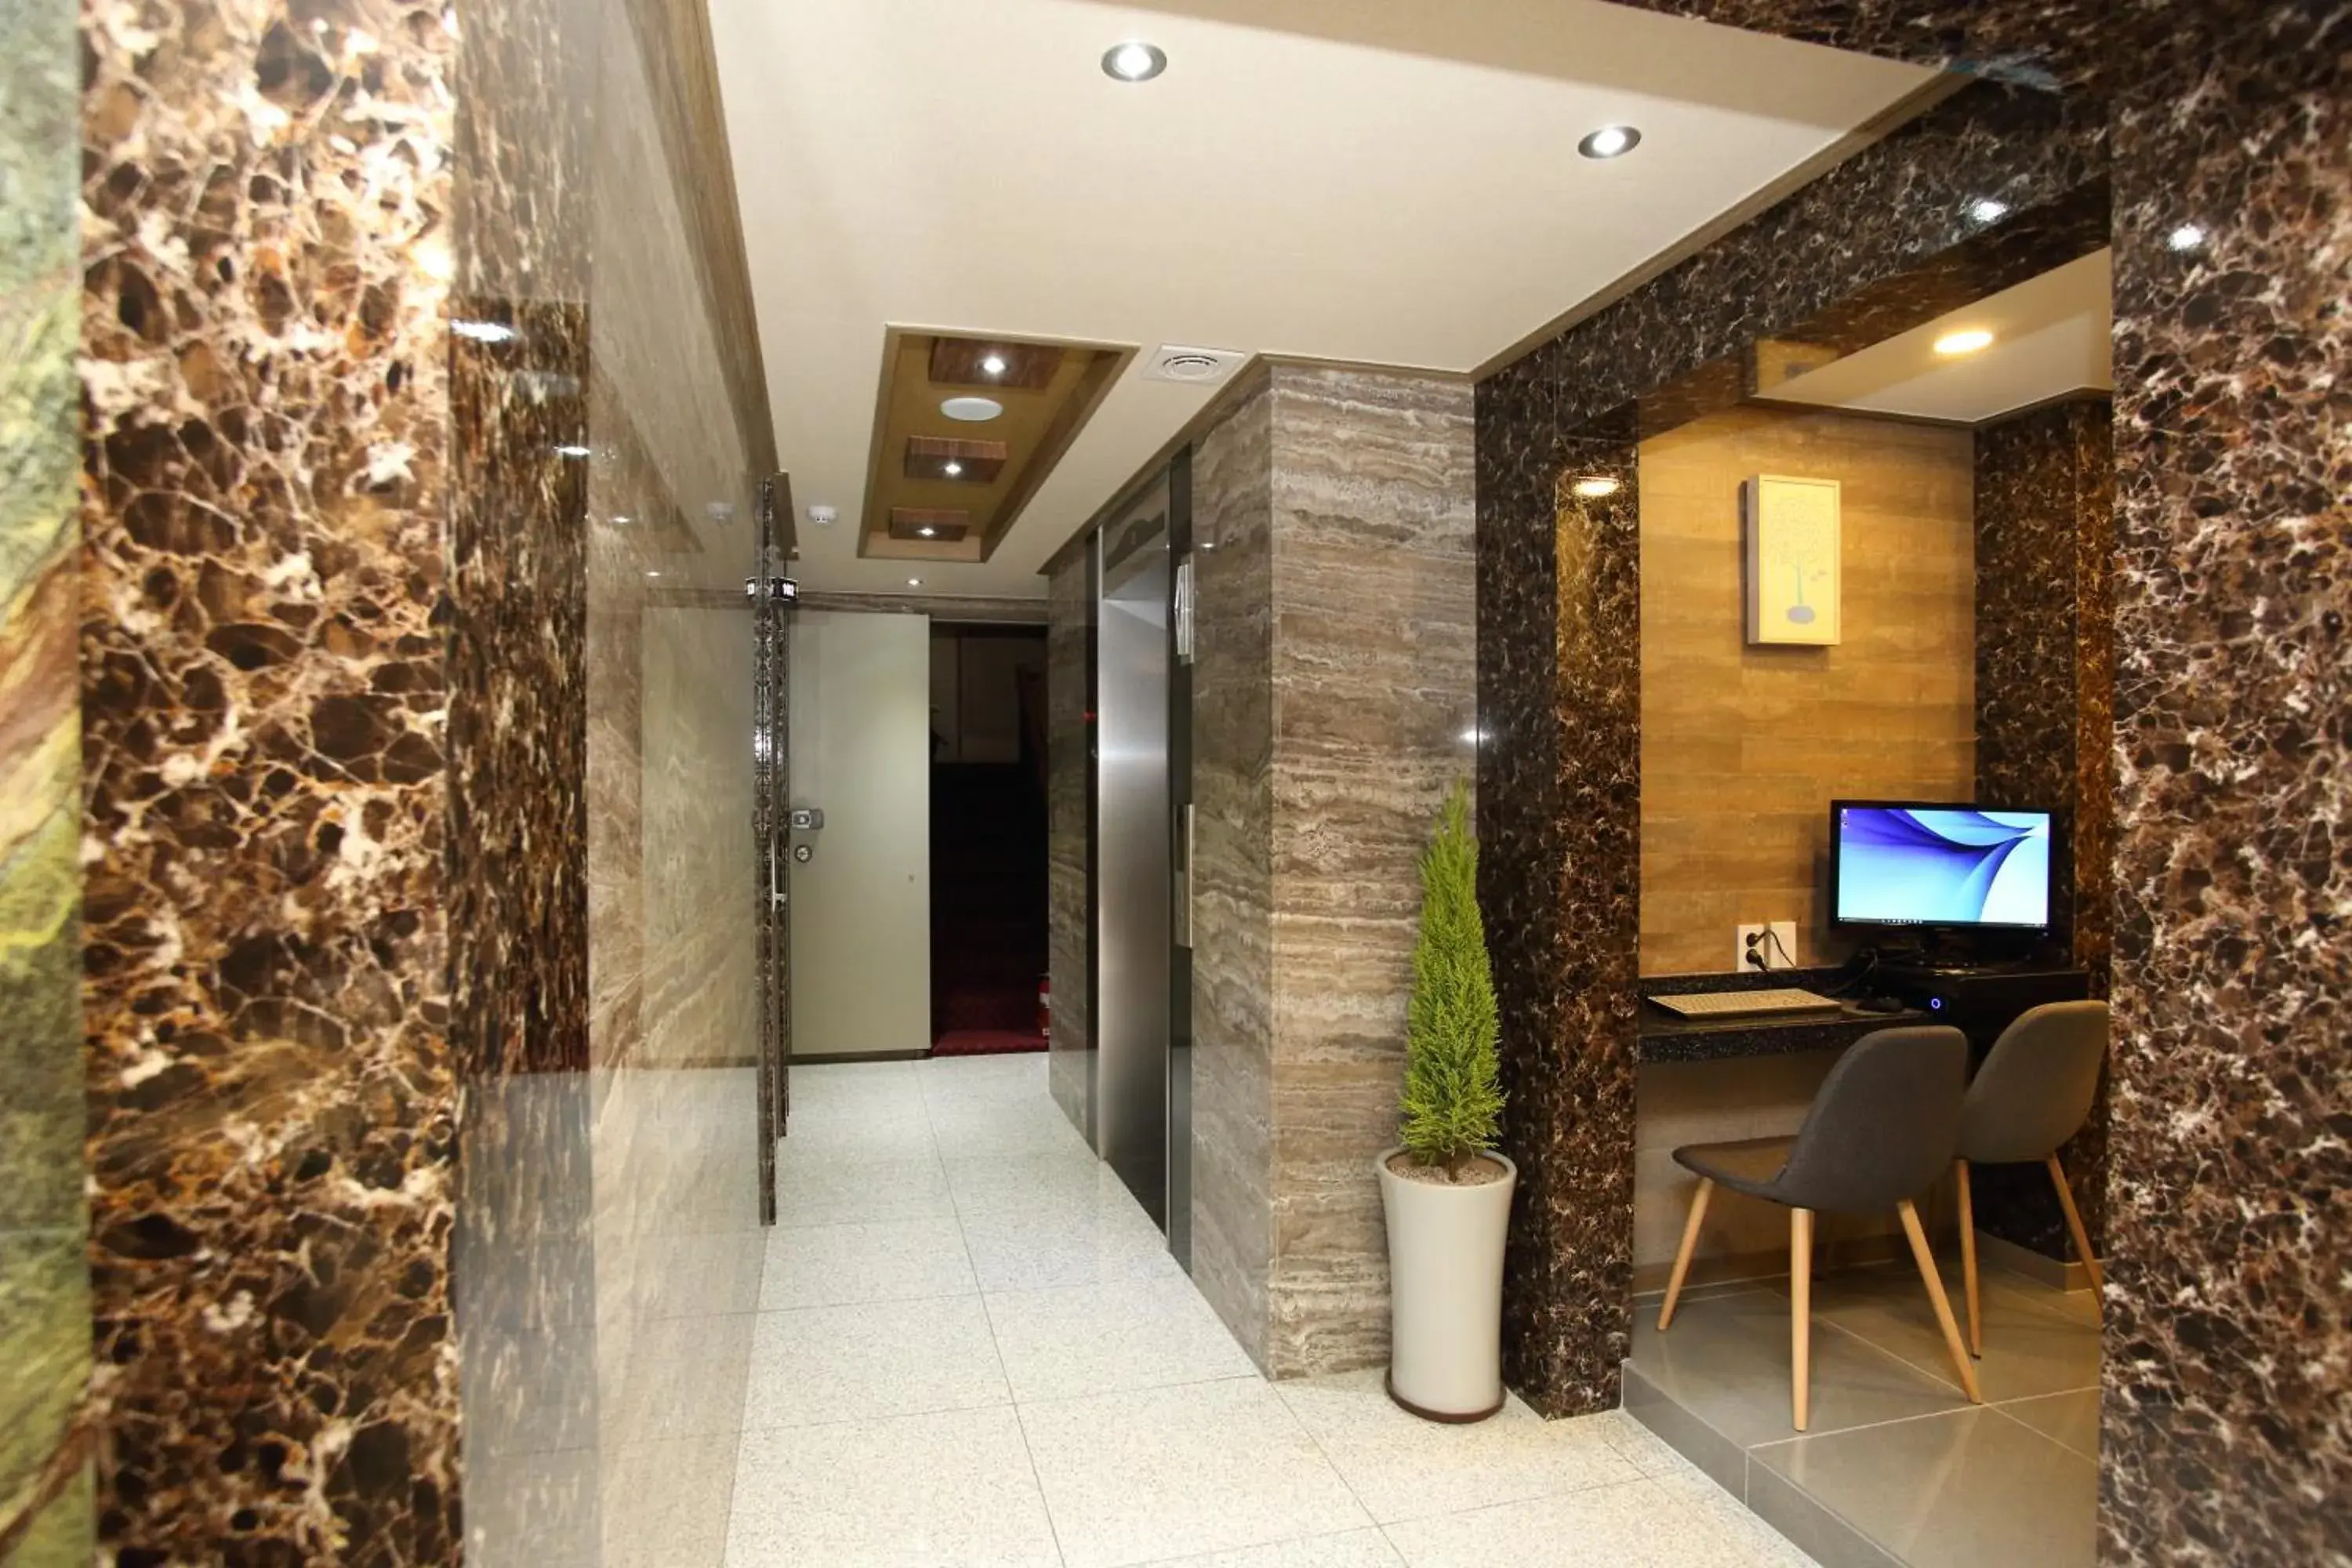 Area and facilities in Daeyoung Hotel Myeongdong